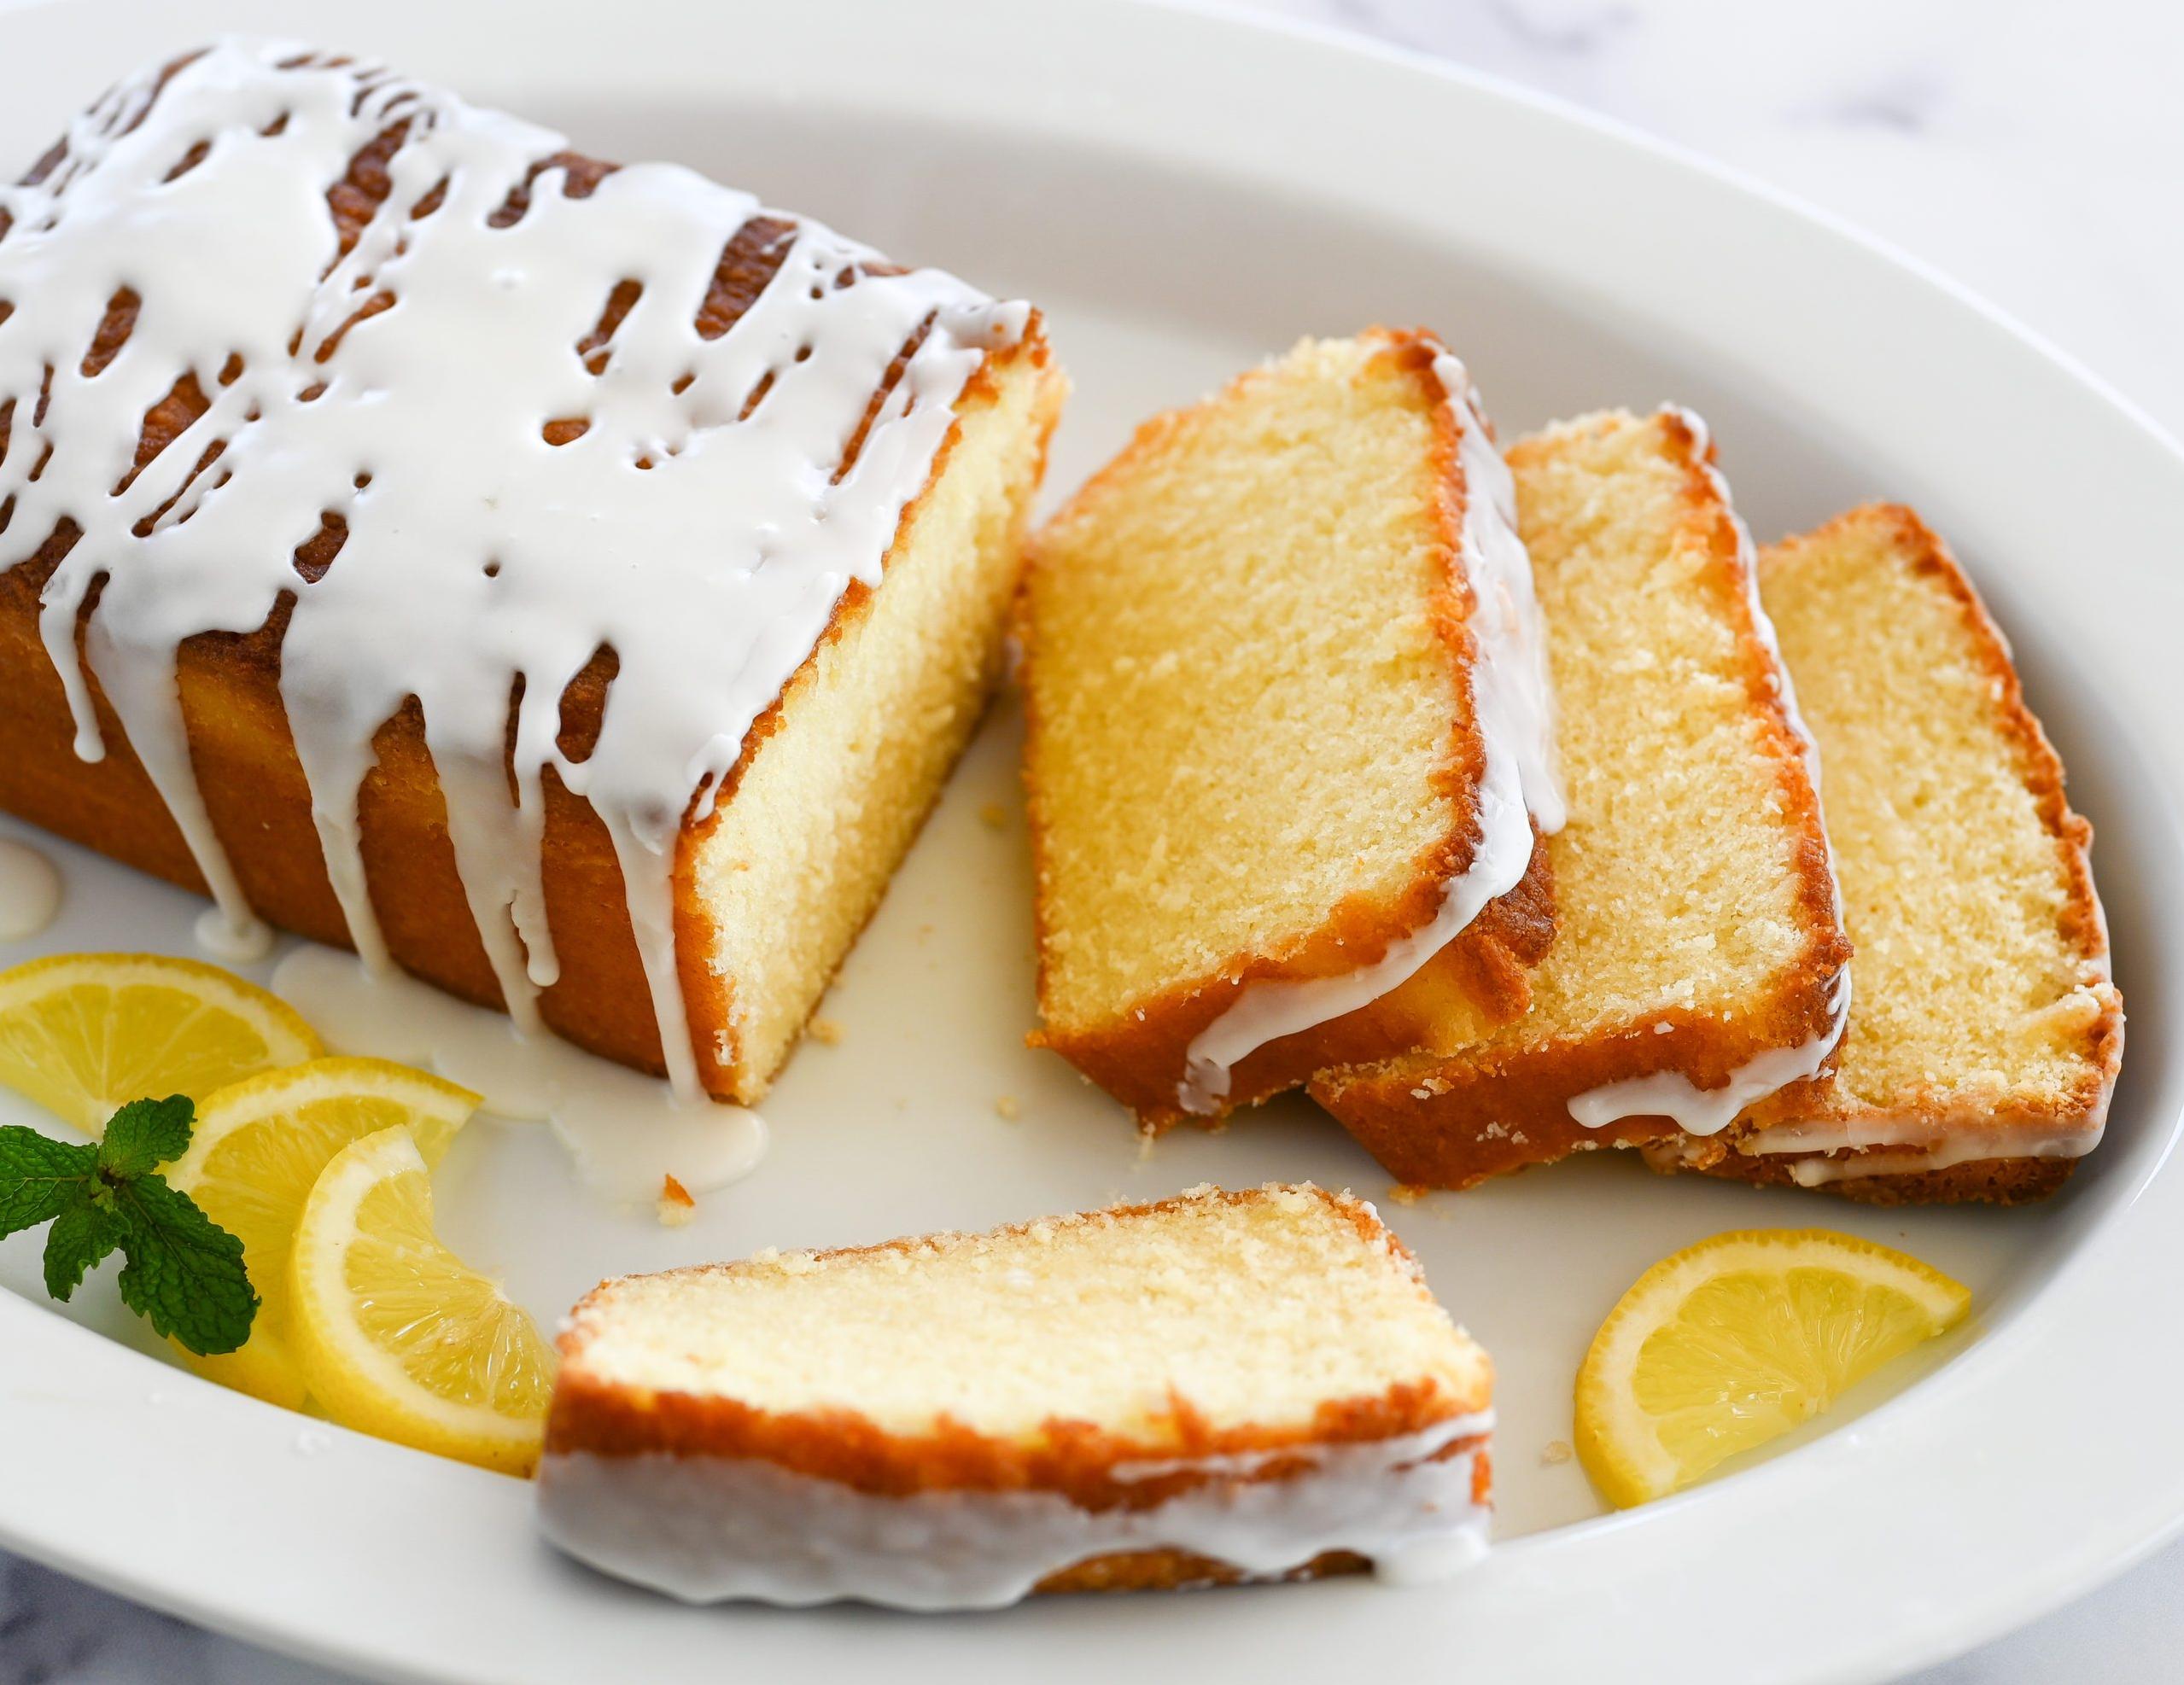  Who can resist a slice of this scrumptious lemon cake?